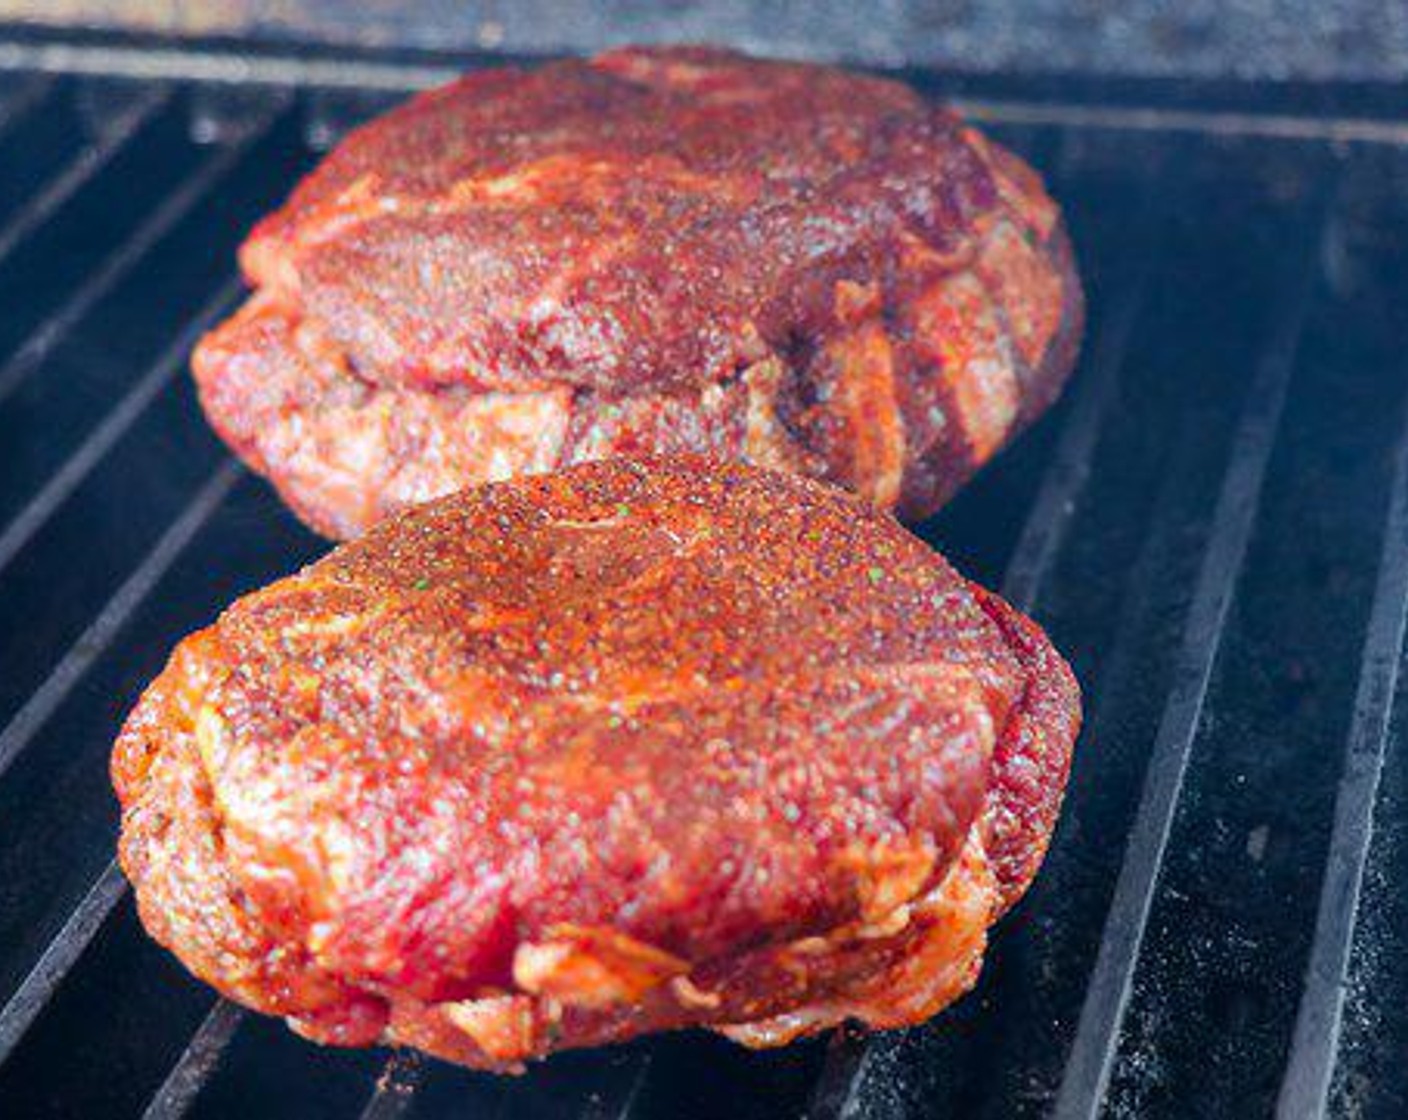 step 3 Place each steak on hot grill grates at 550-600 degrees F (290-315 degrees C) for 4 minutes. Twist each steak 90⁰ to create even grill marks.